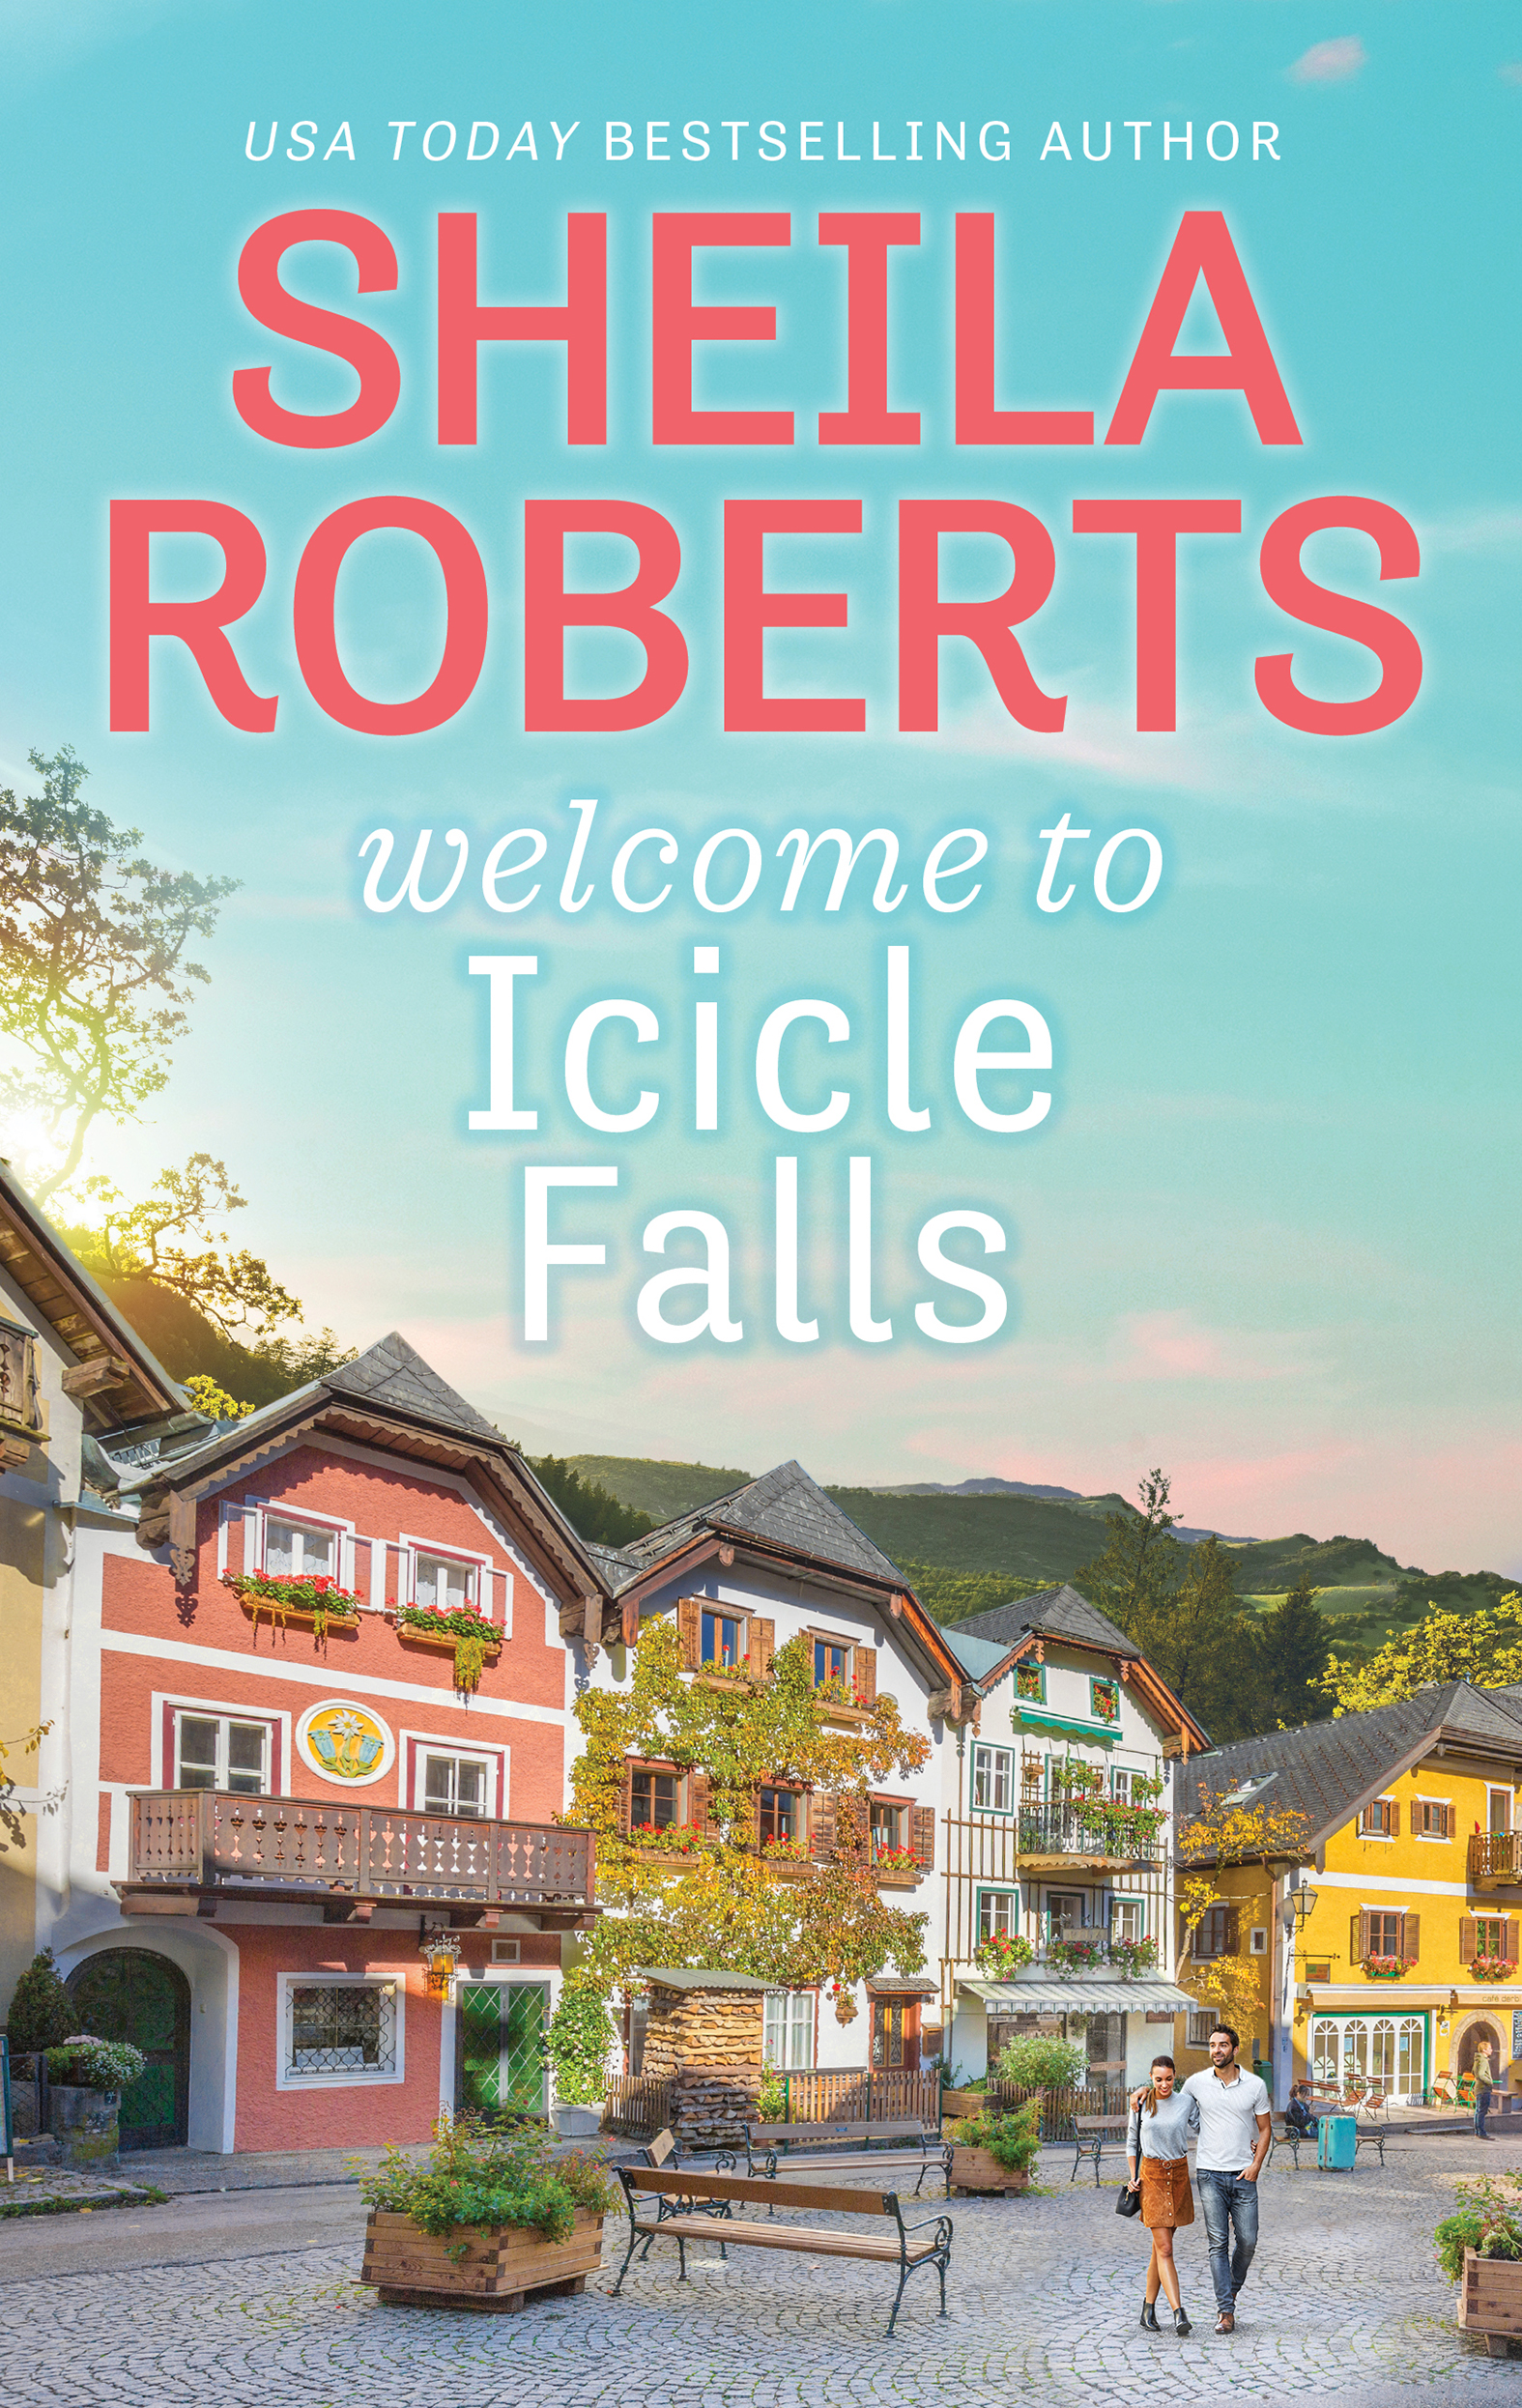 Cover Image of Welcome to Icicle Falls